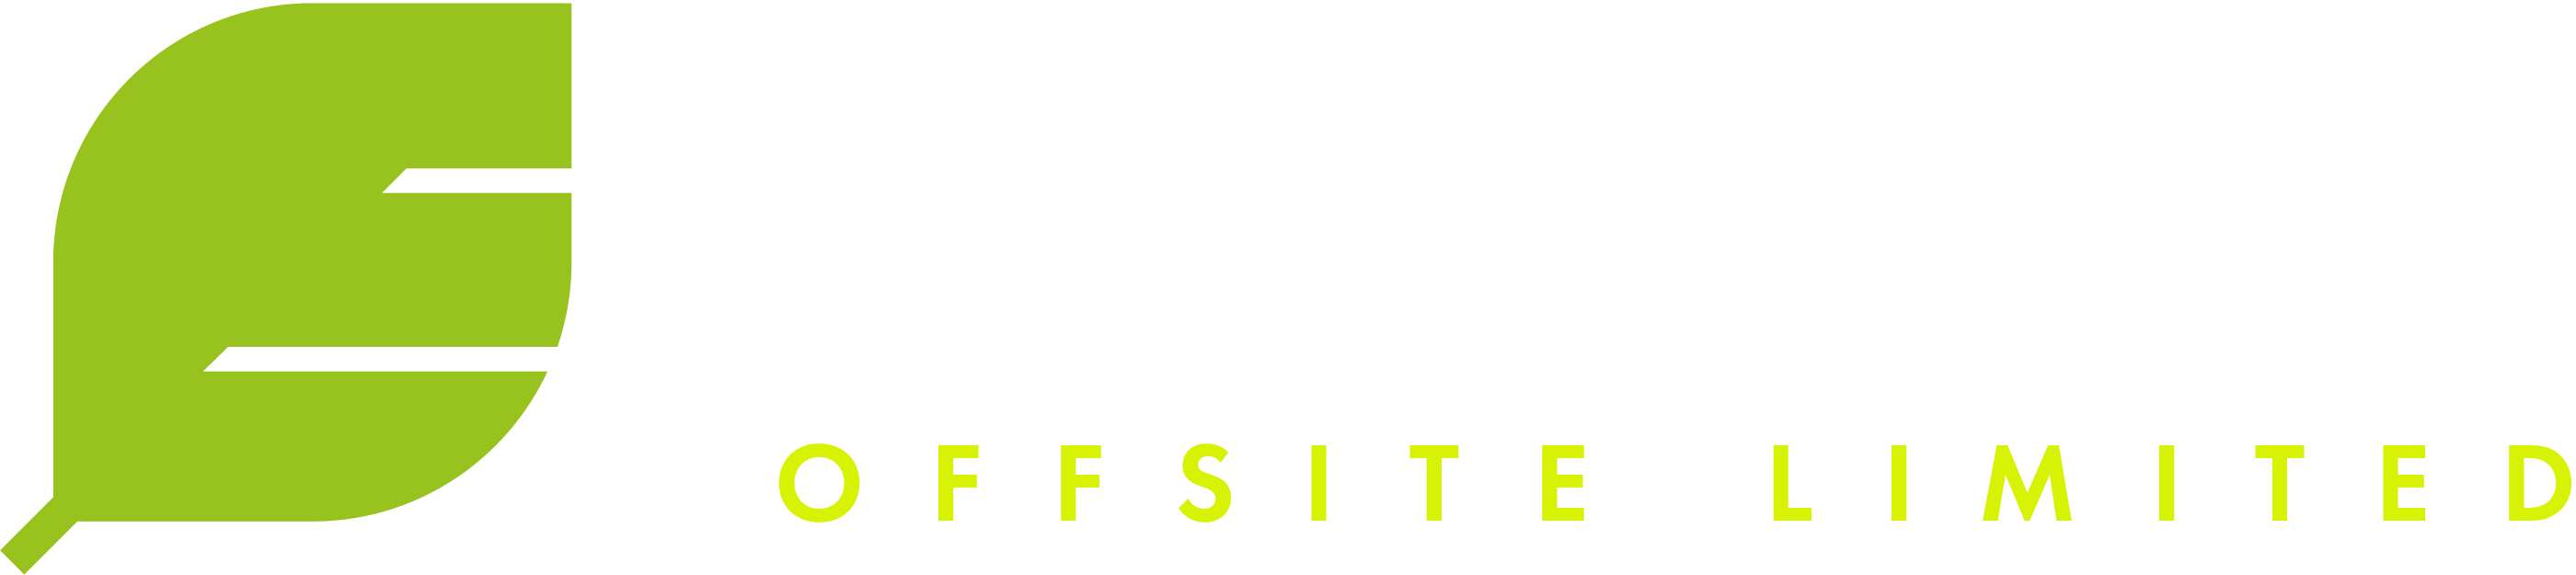 ECO-SPACE OFFSITE LIMITED